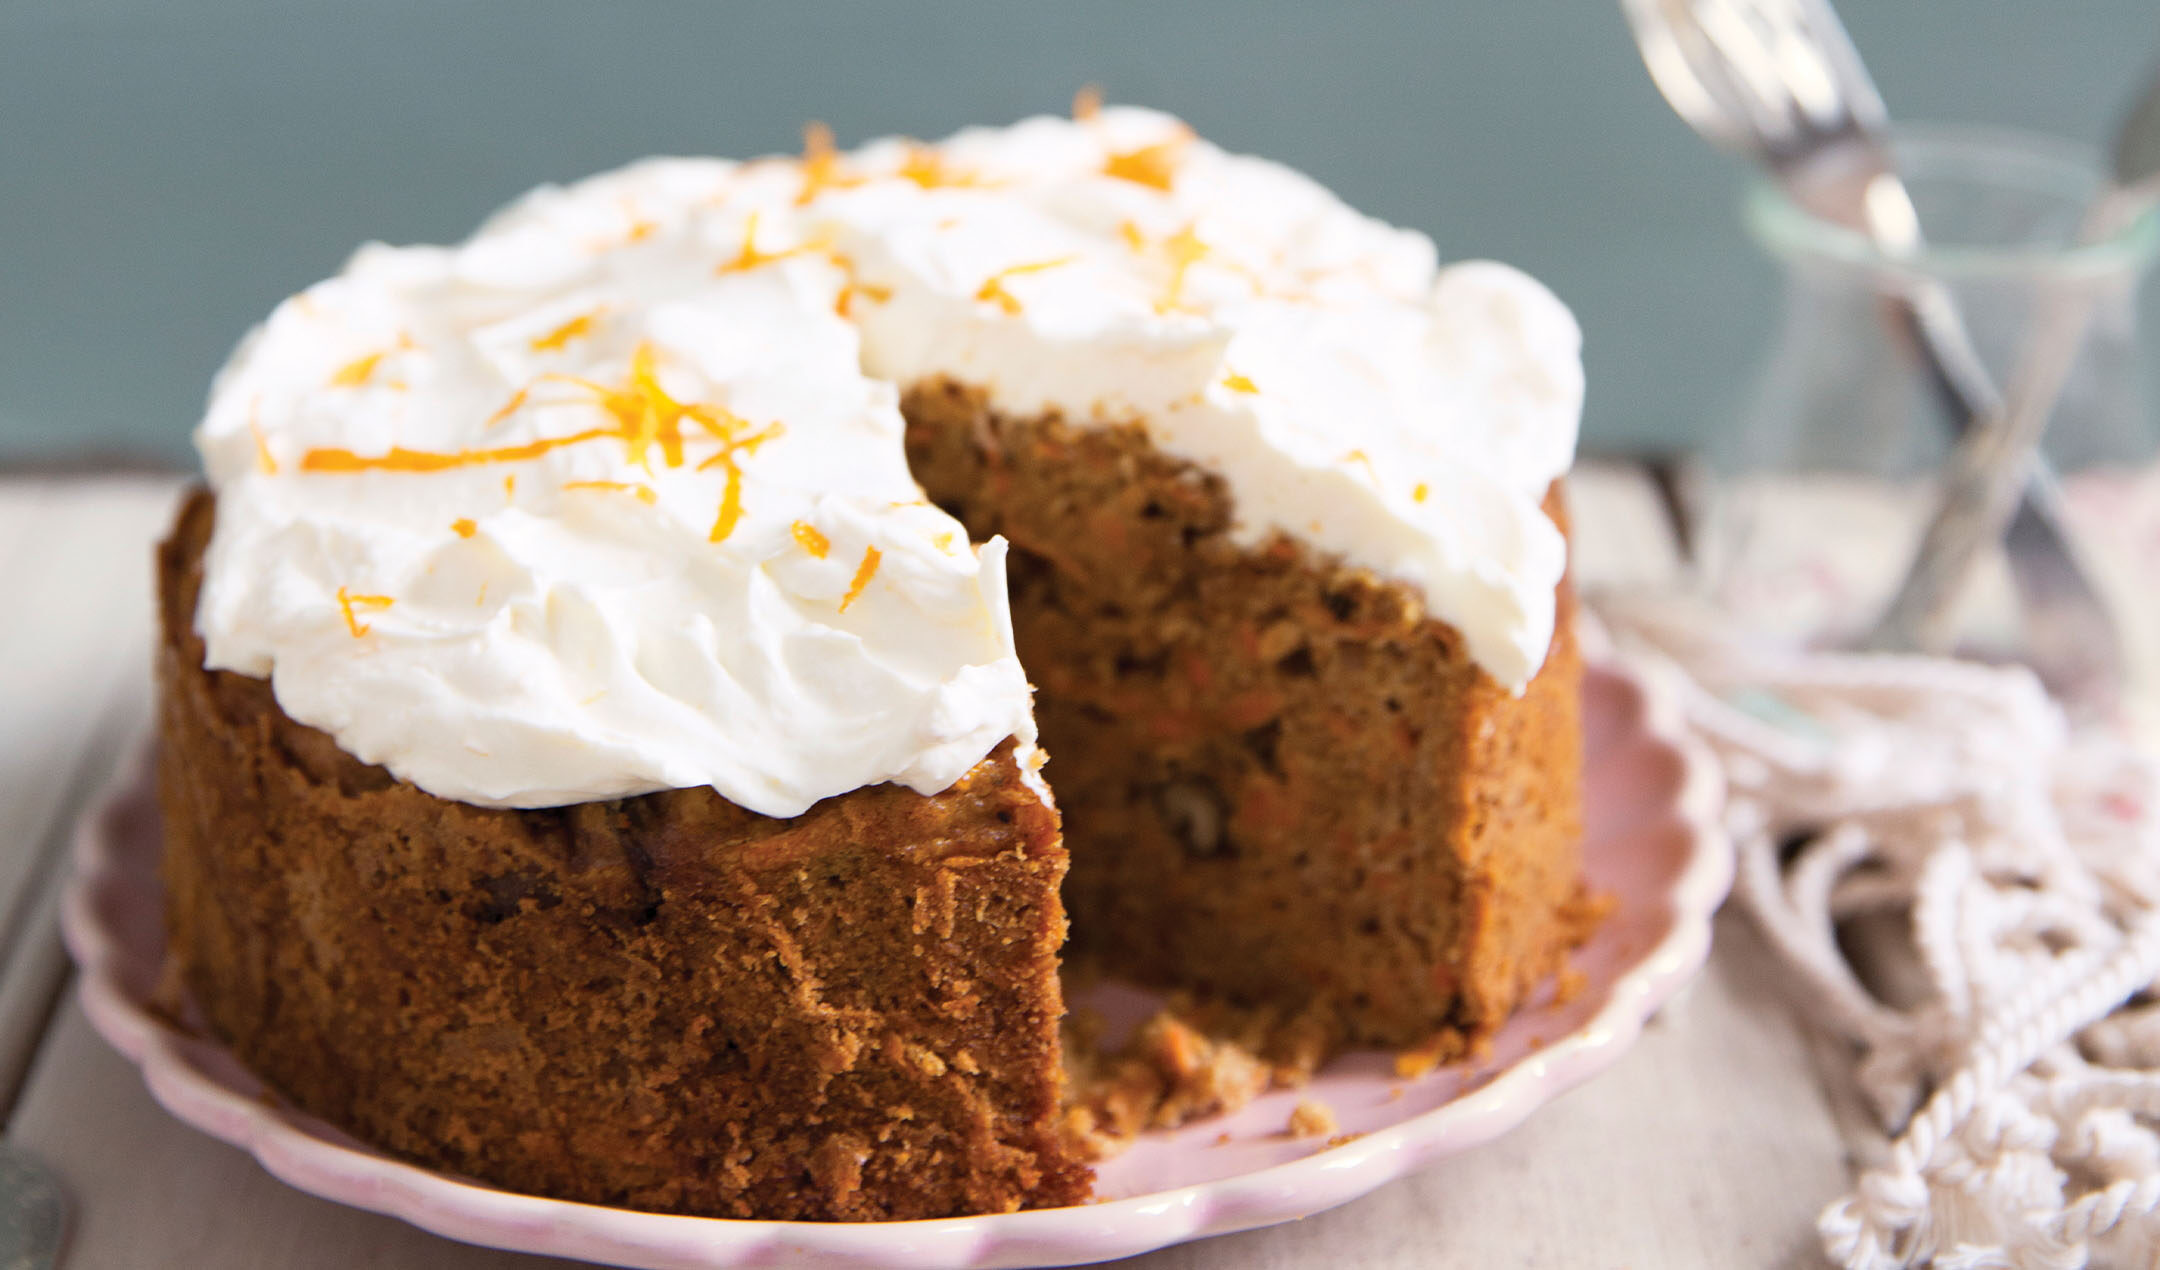 Spiced carrot cake recipe | easyFood